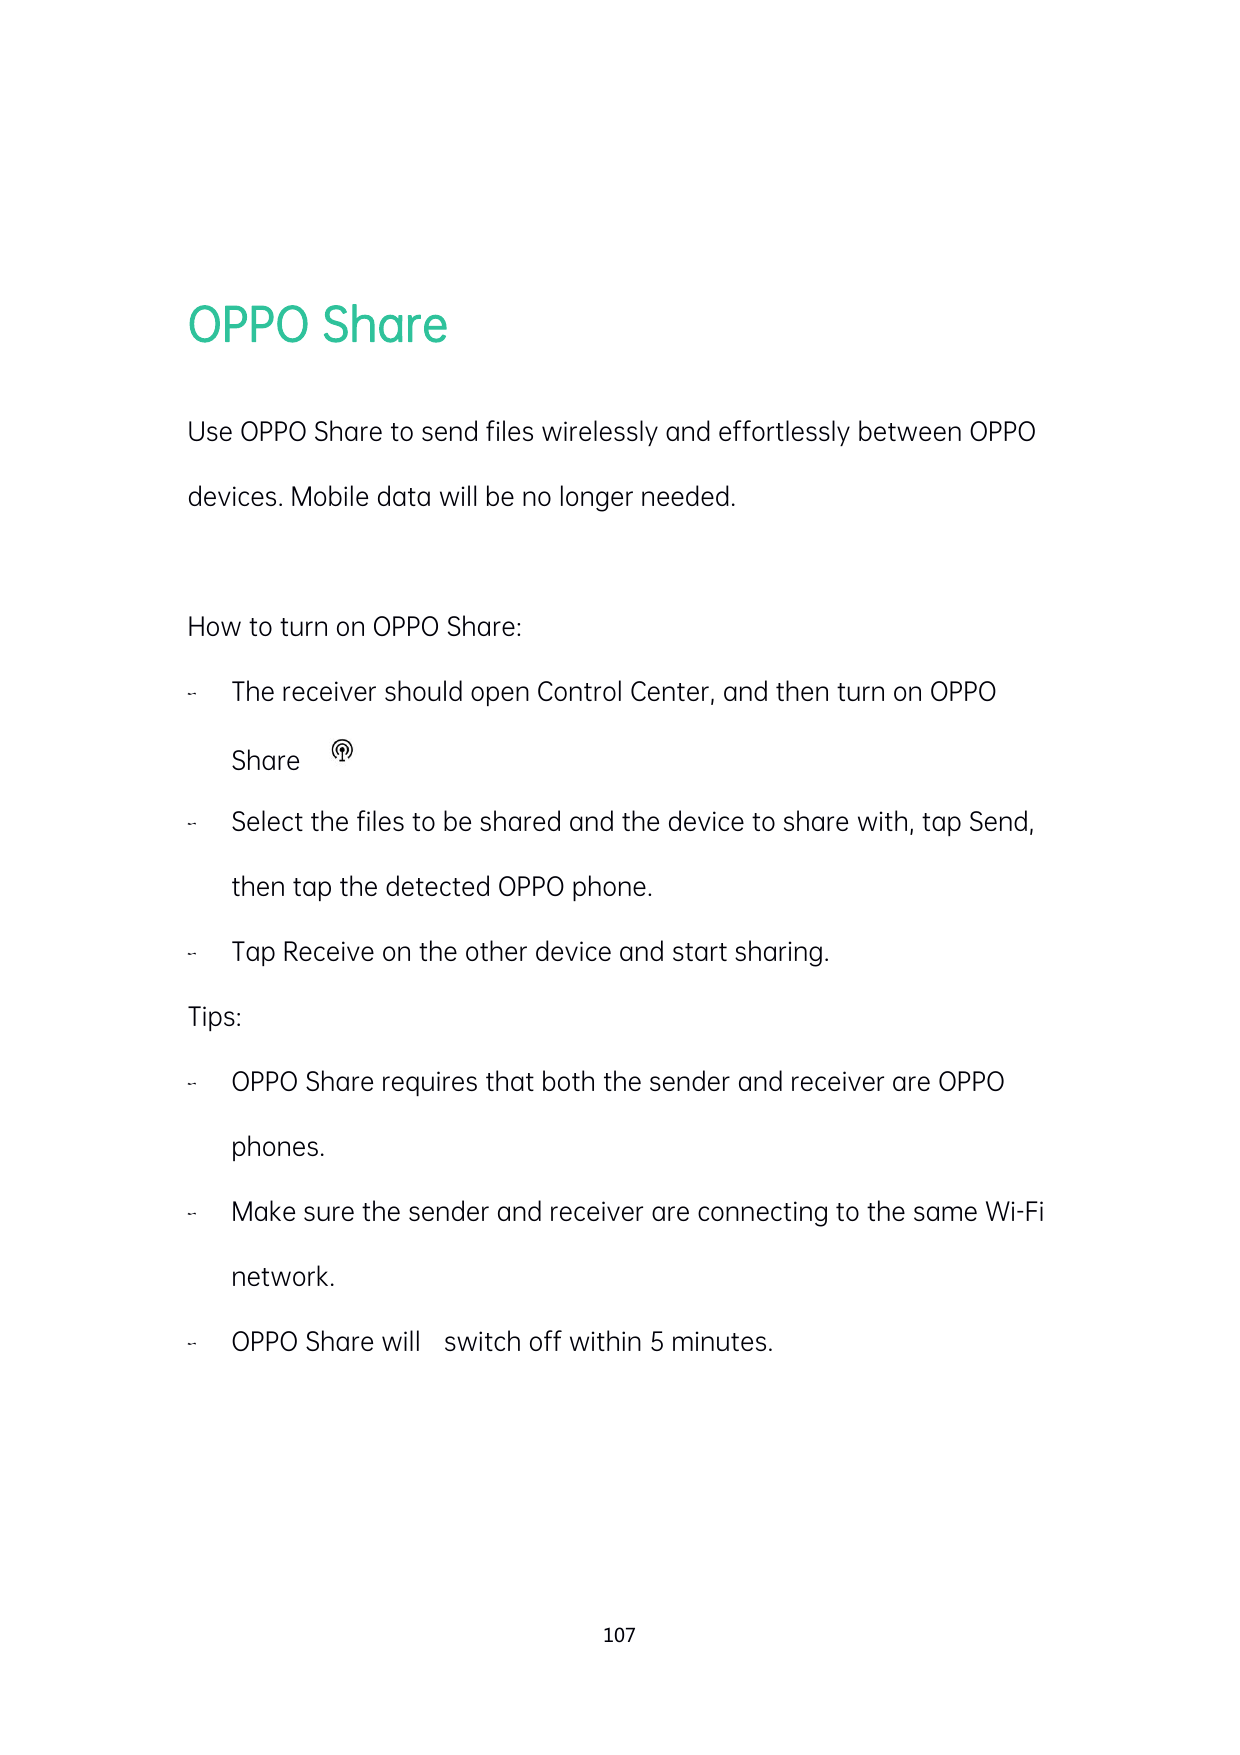 OPPO ShareUse OPPO Share to send files wirelessly and effortlessly between OPPOdevices. Mobile data will be no longer needed.How